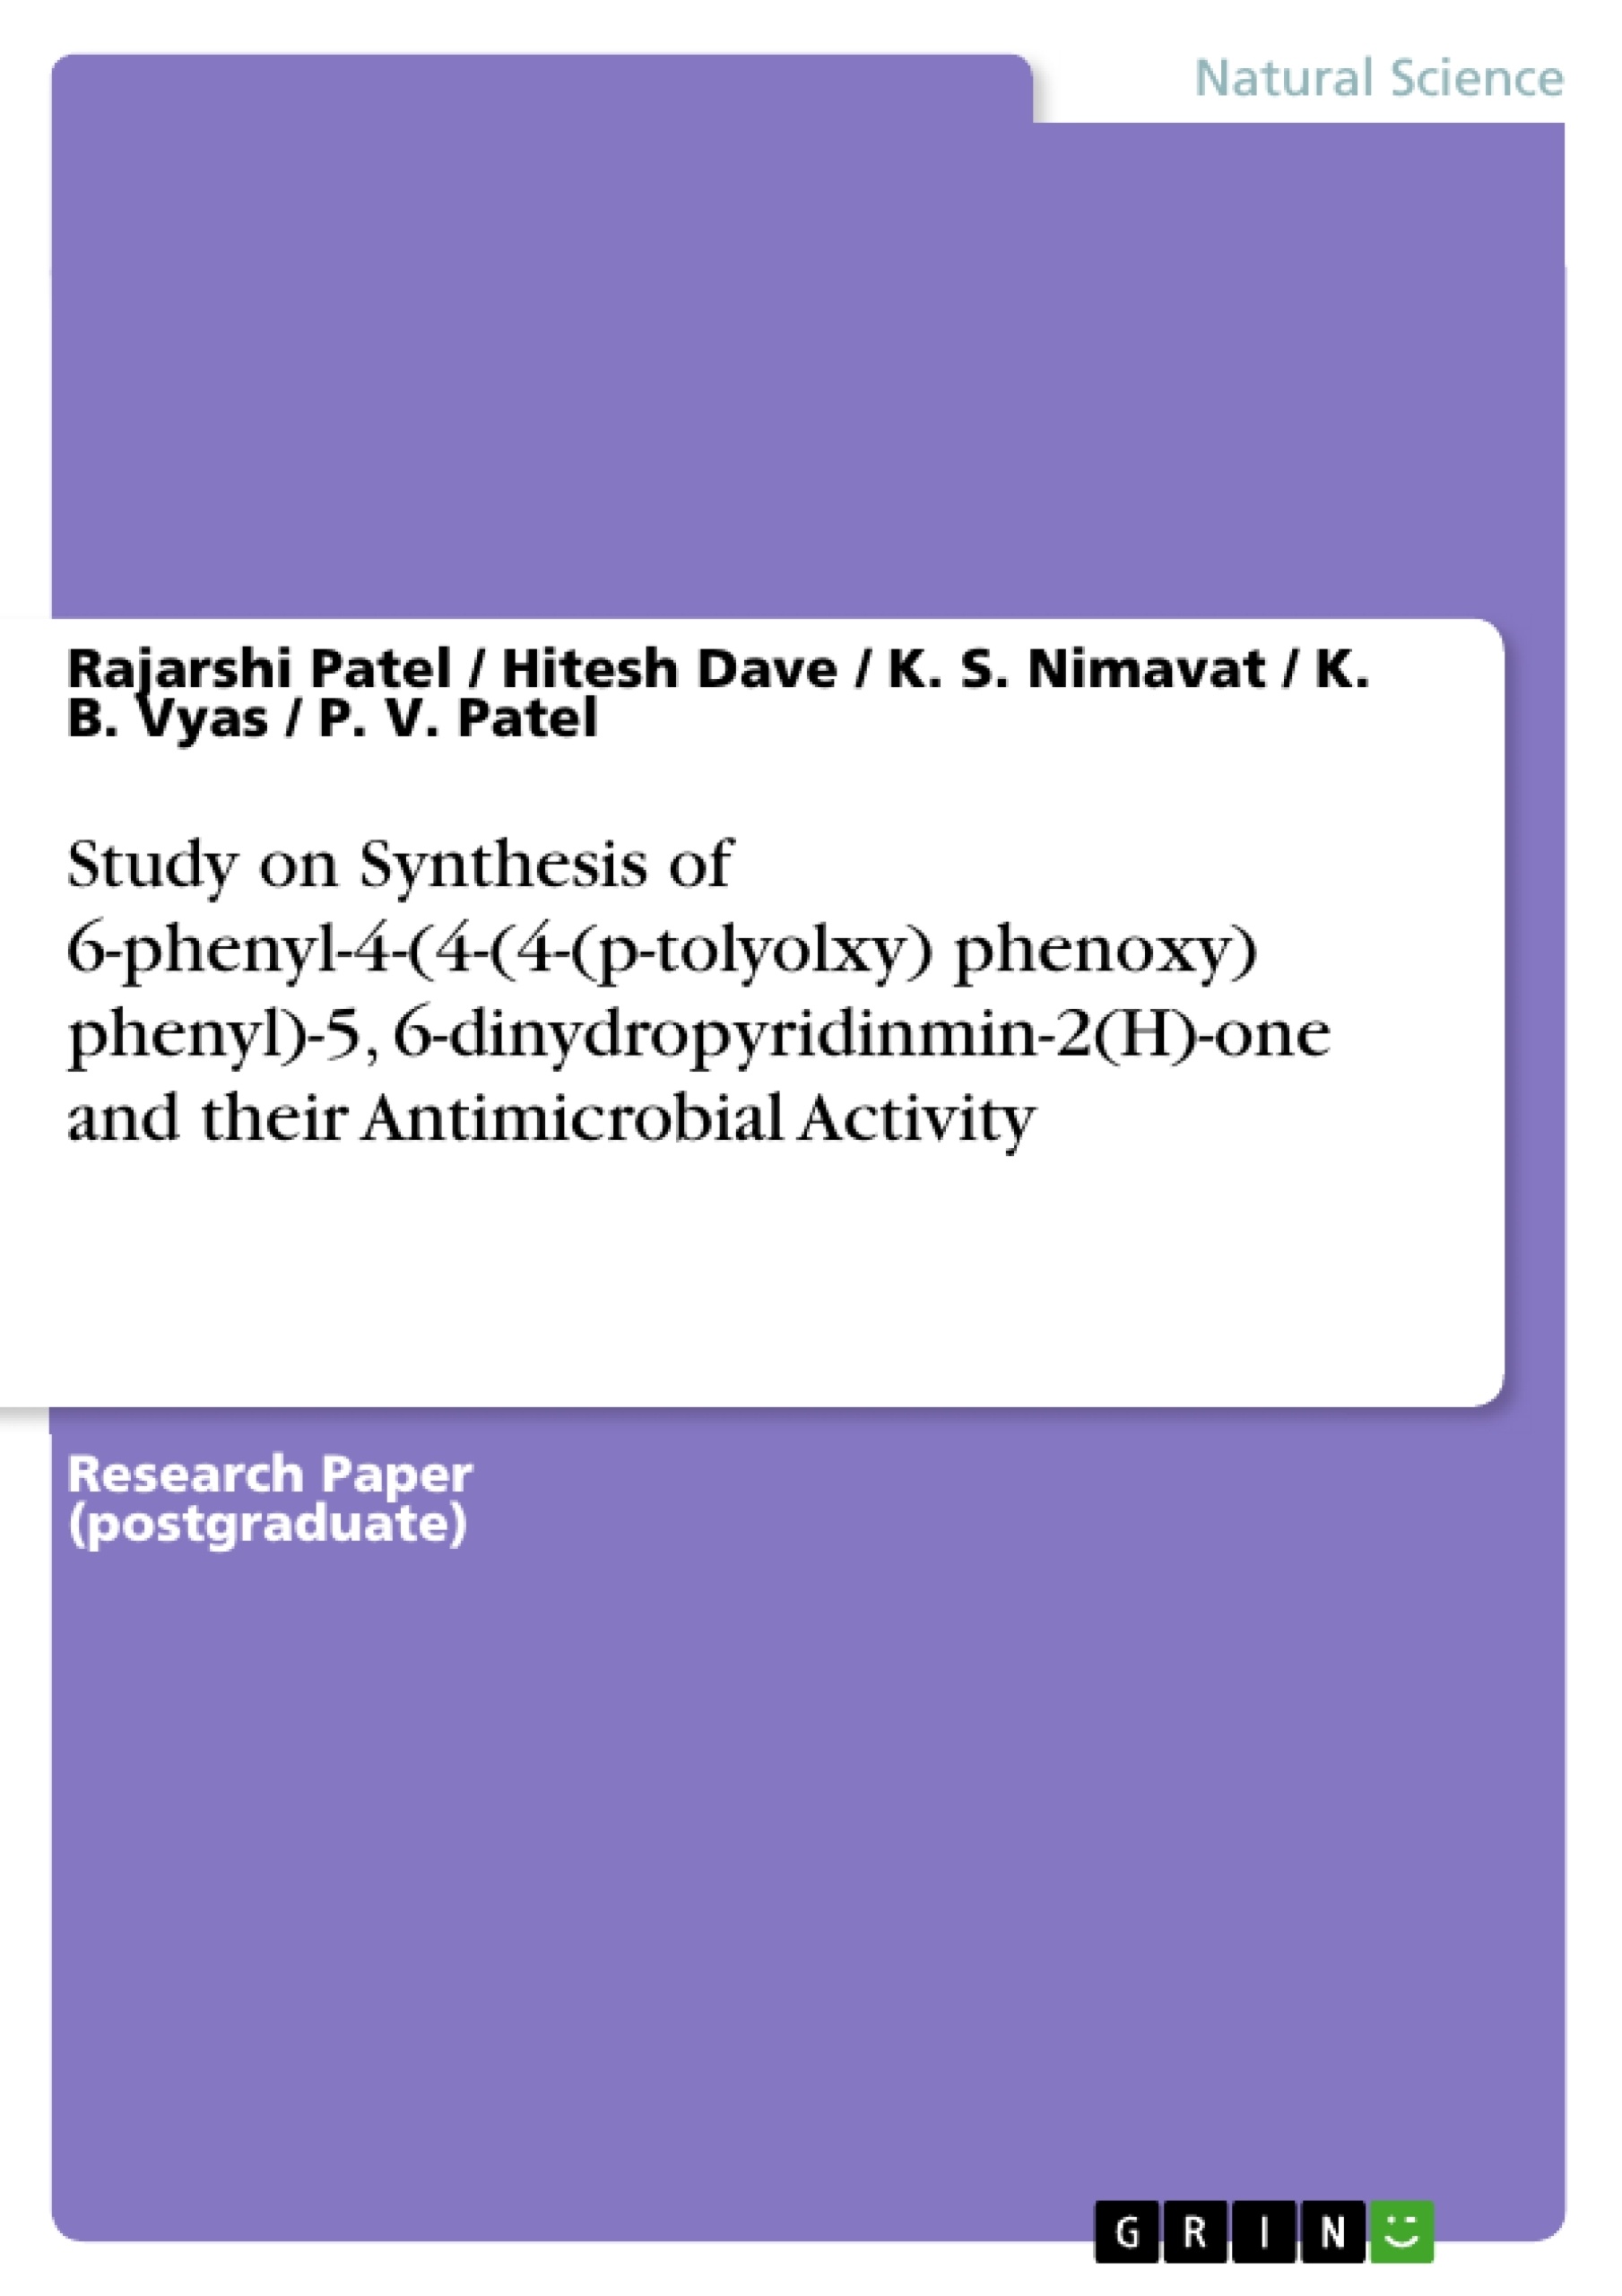 Título: Study on Synthesis of 6-phenyl-4-(4-(4-(p-tolyolxy) phenoxy) phenyl)-5, 6-dinydropyridinmin-2(H)-one and their Antimicrobial Activity